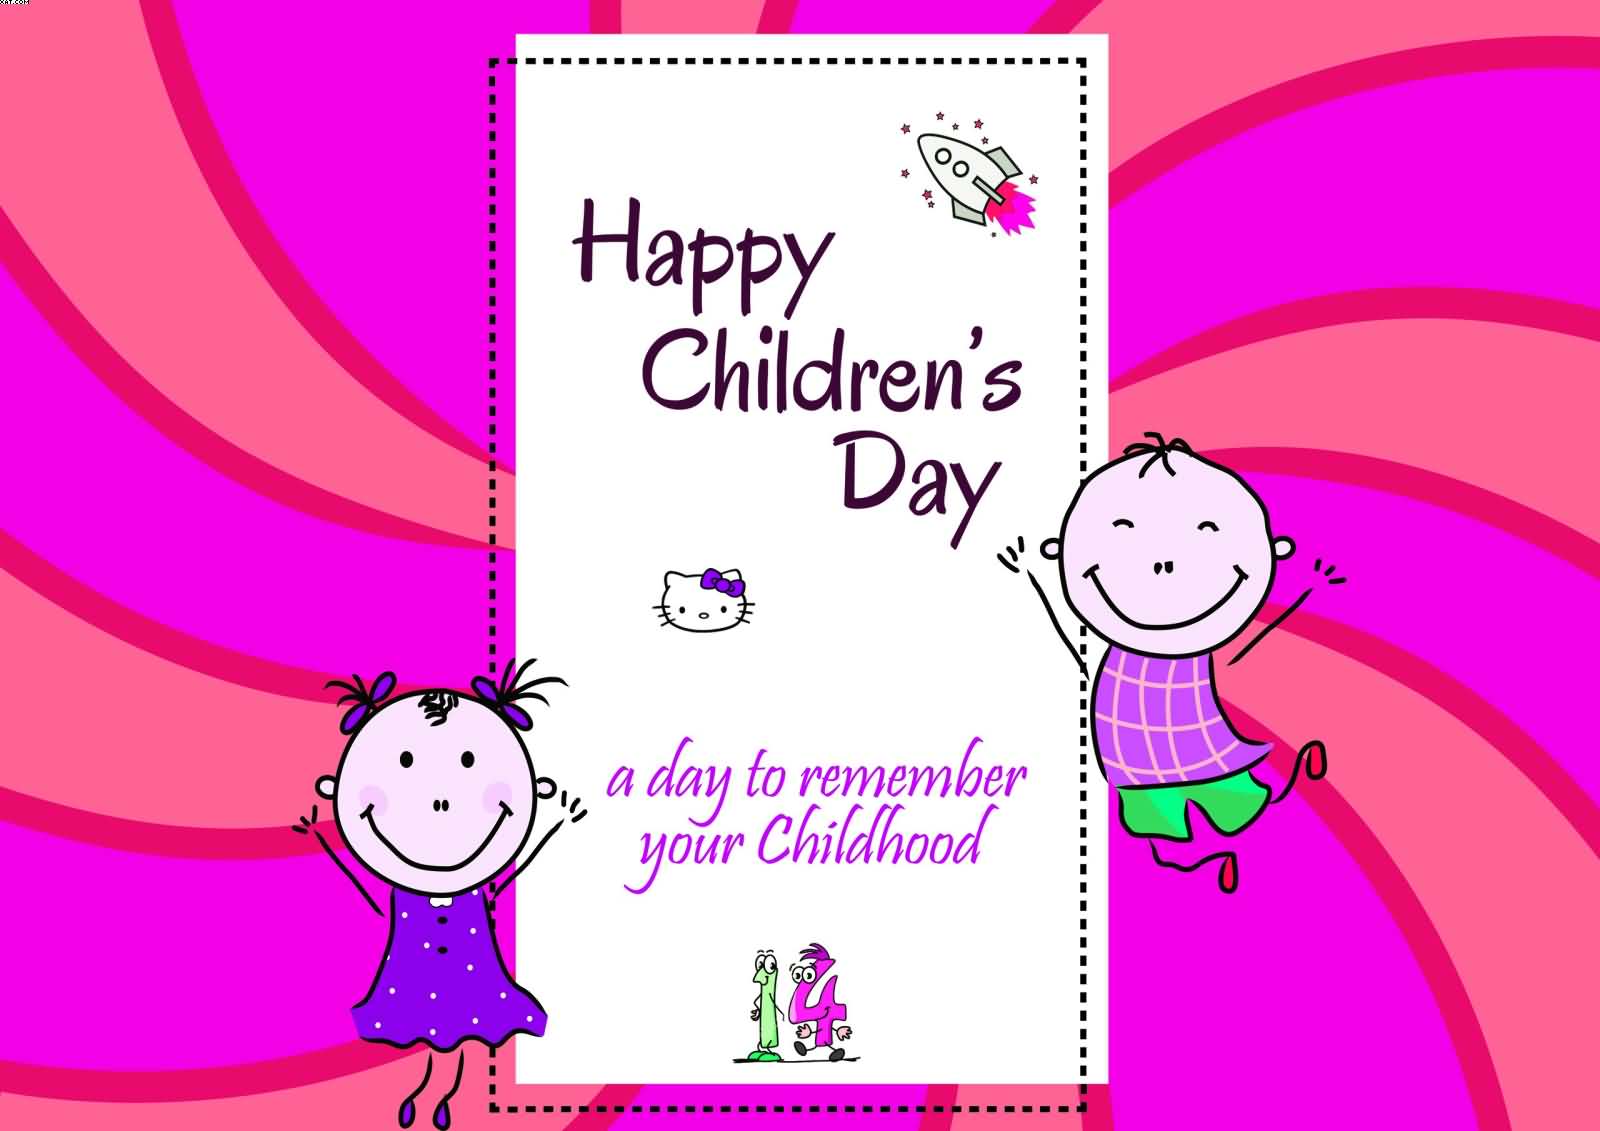 Happy Children’s day a day to remember your childhood